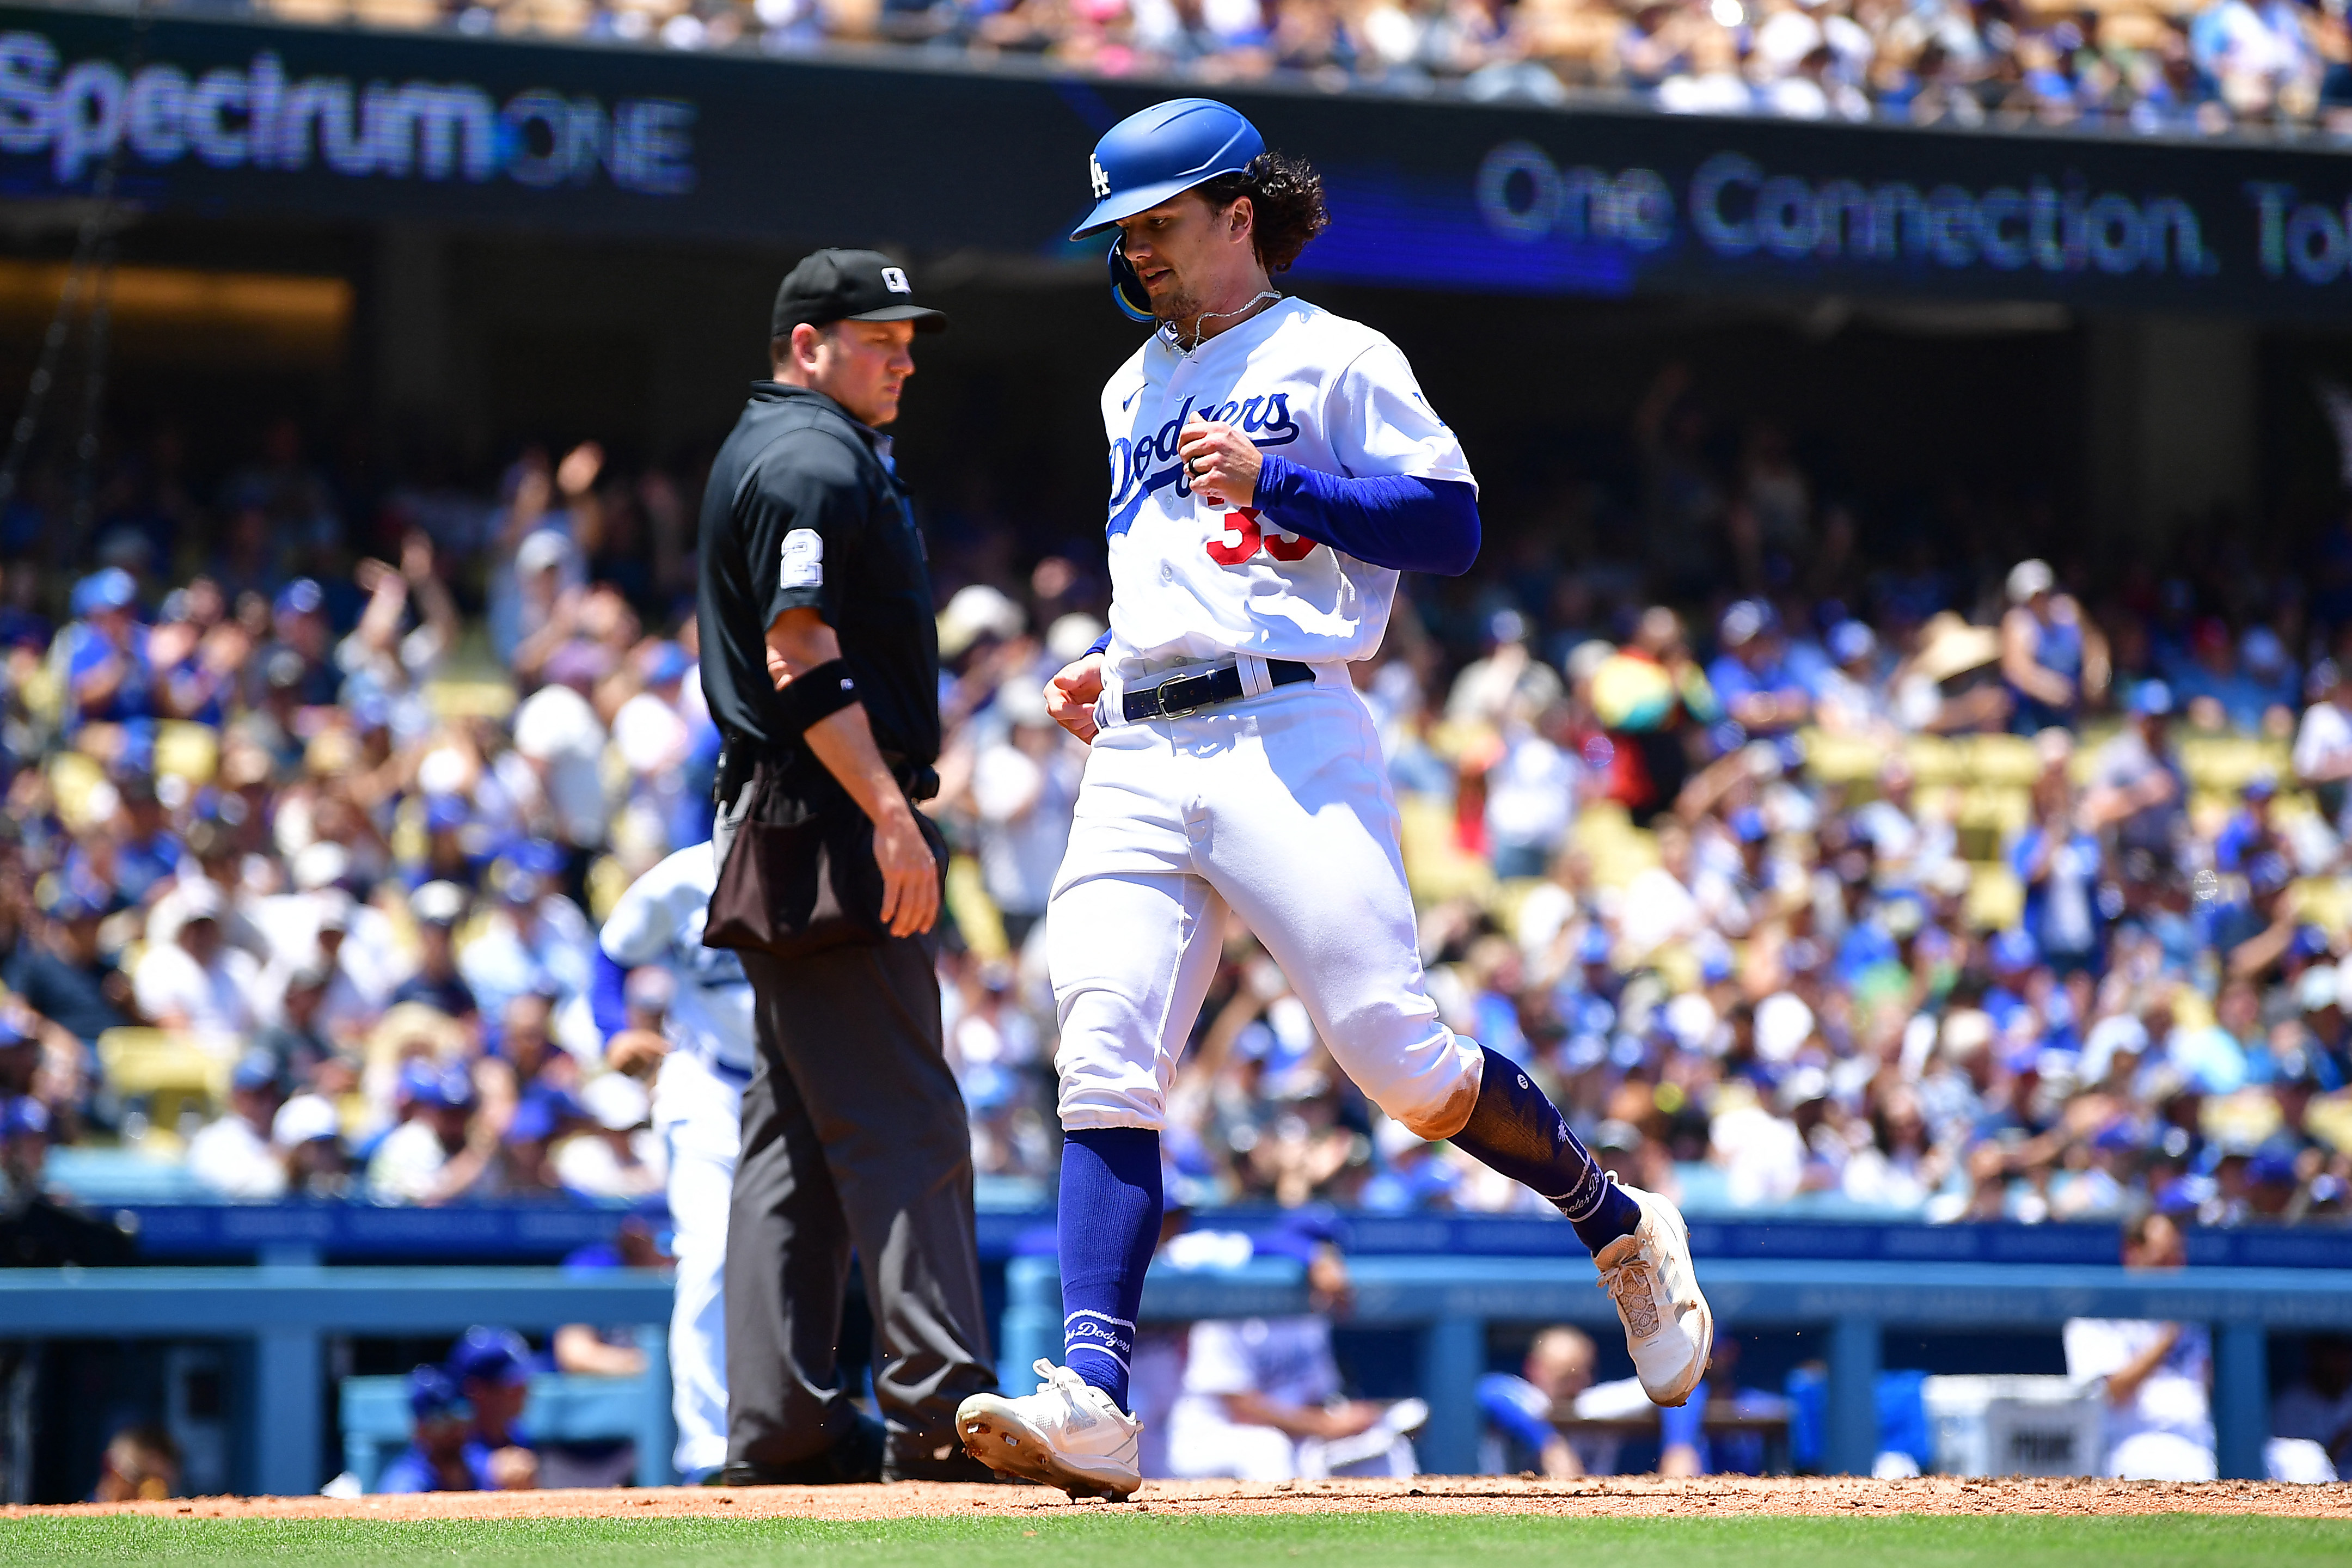 Five-run seventh propels Dodgers to 7-3 win over Twins